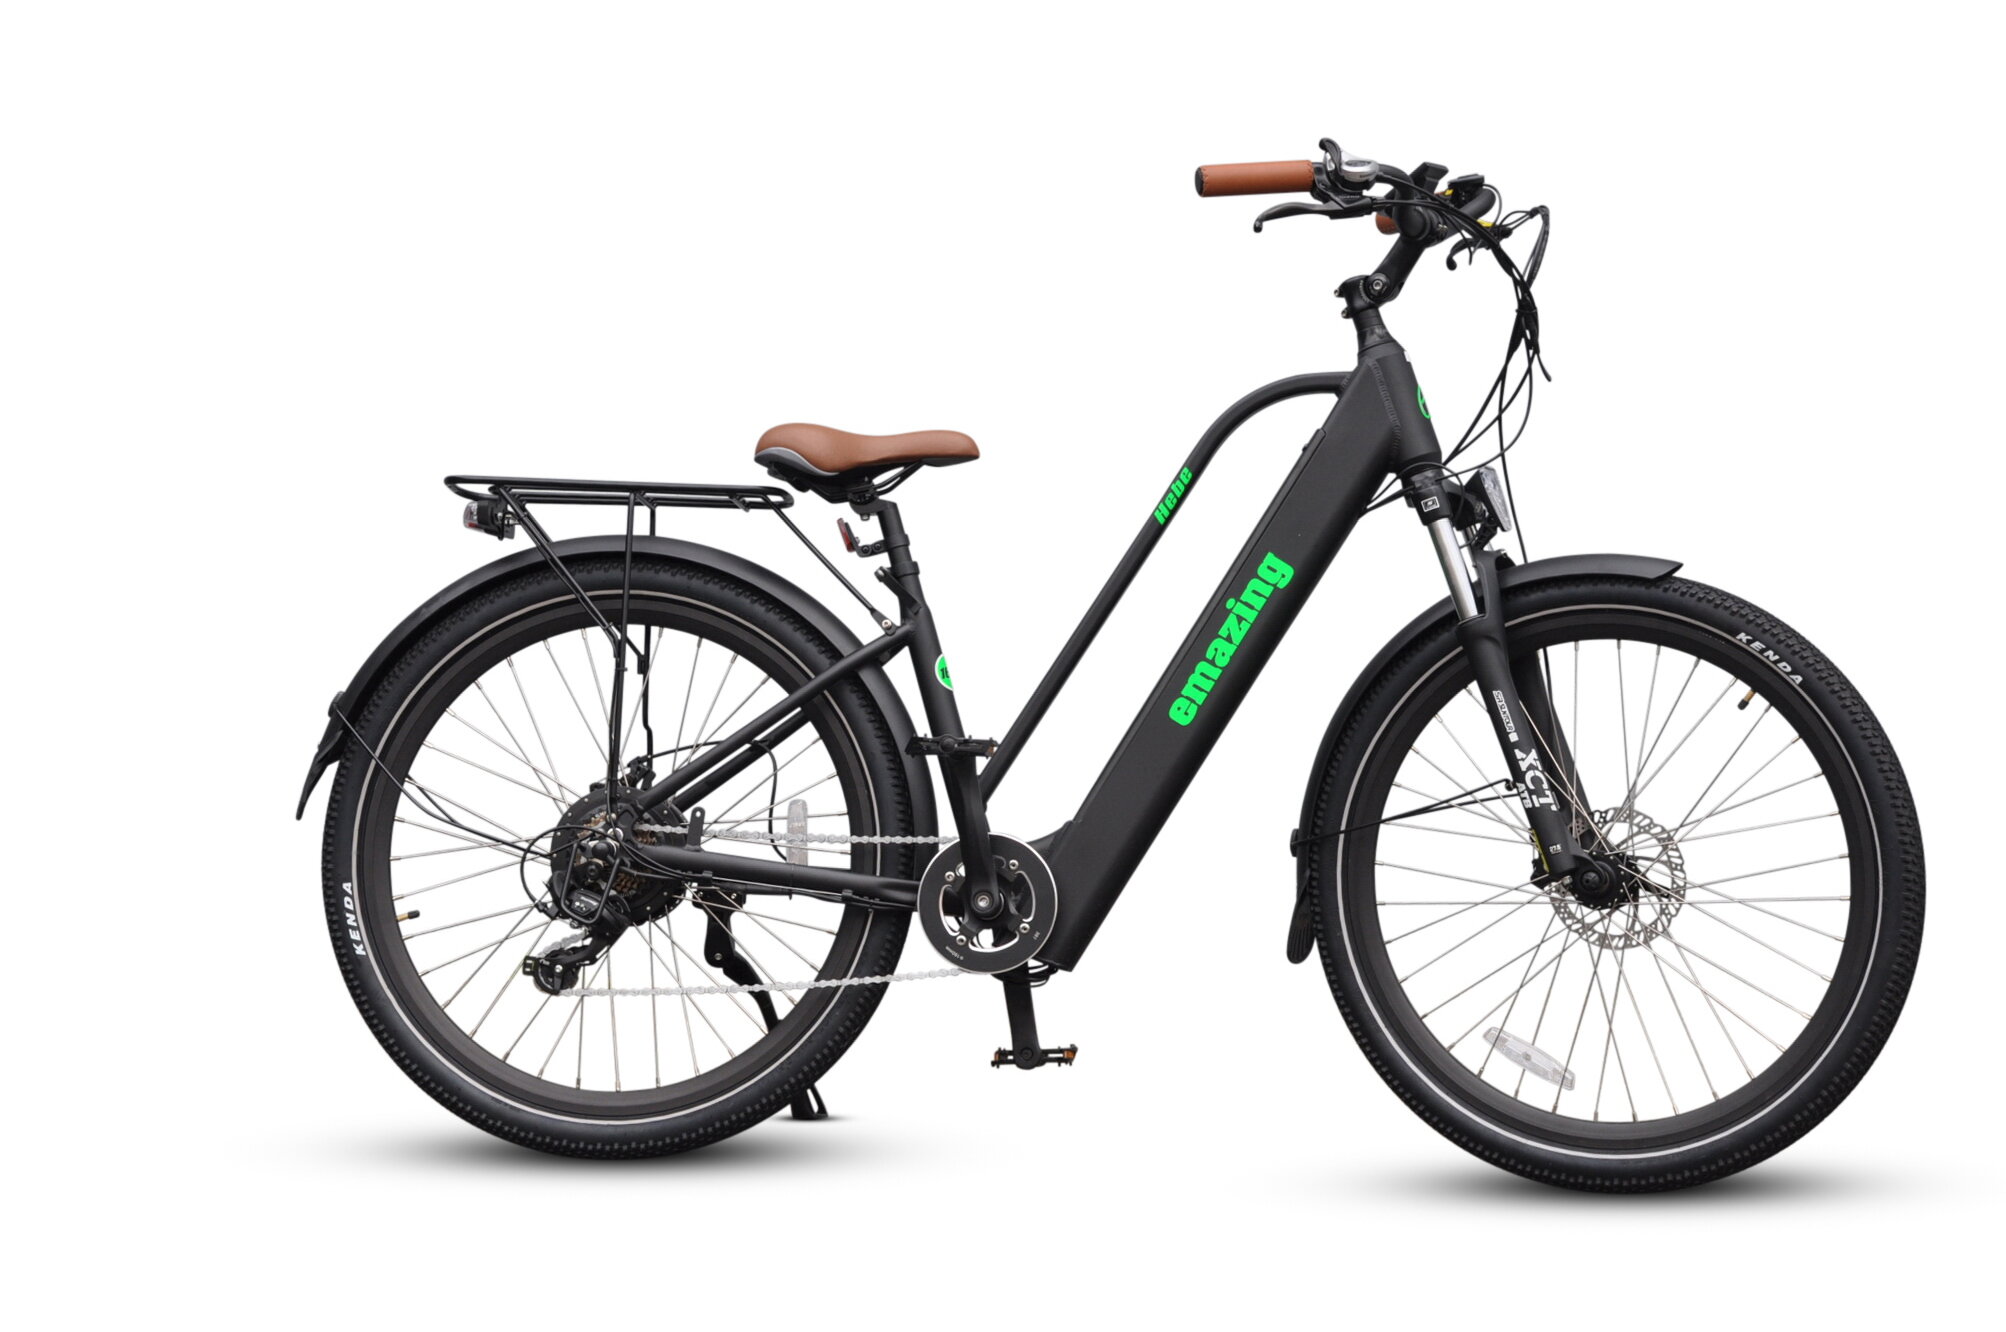 Emazing Hebe Electric Bikes for Sale - ELV